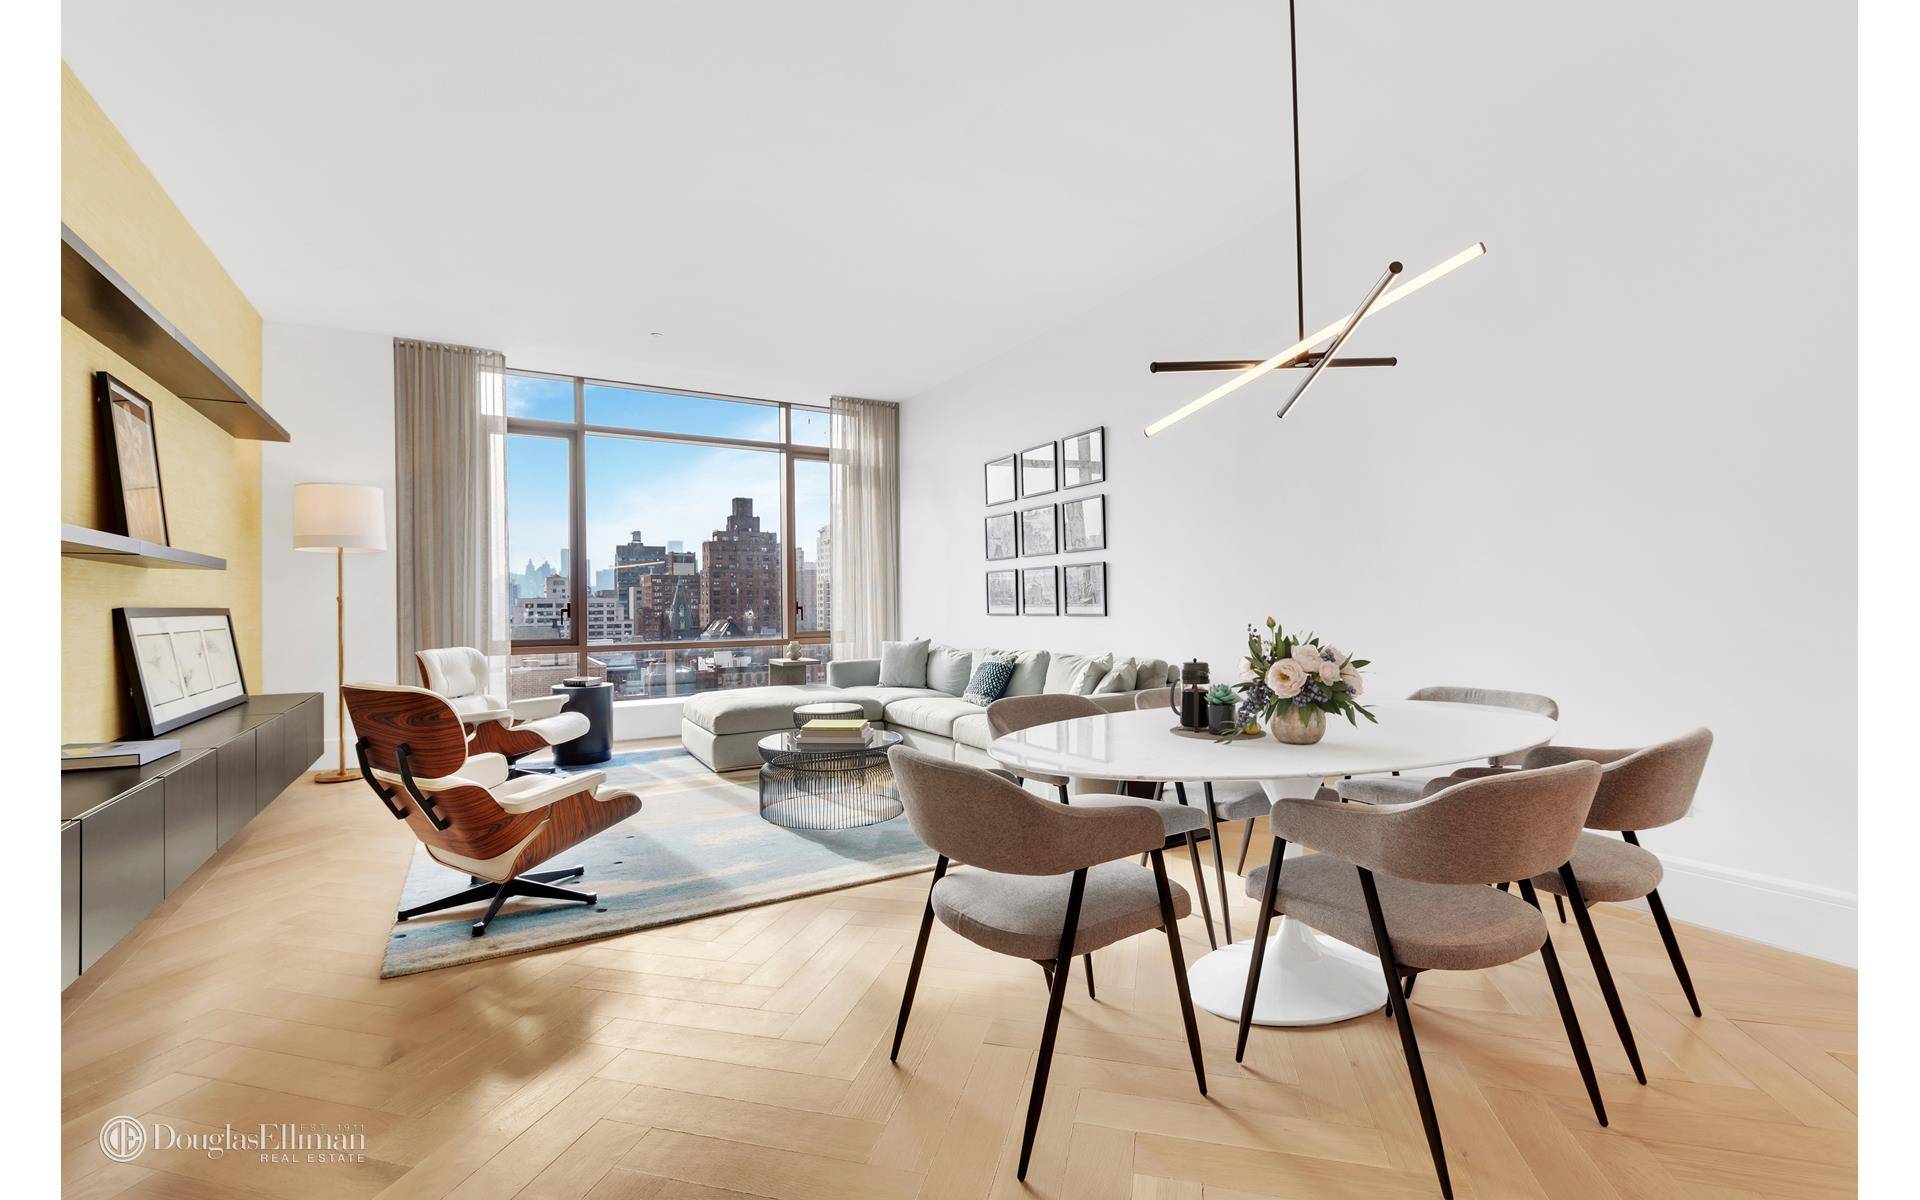 Immediate Occupancy Located at 215 East 19th Street, The Tower offers a distinct collection of 130 loft like studio to four bedroom residences.